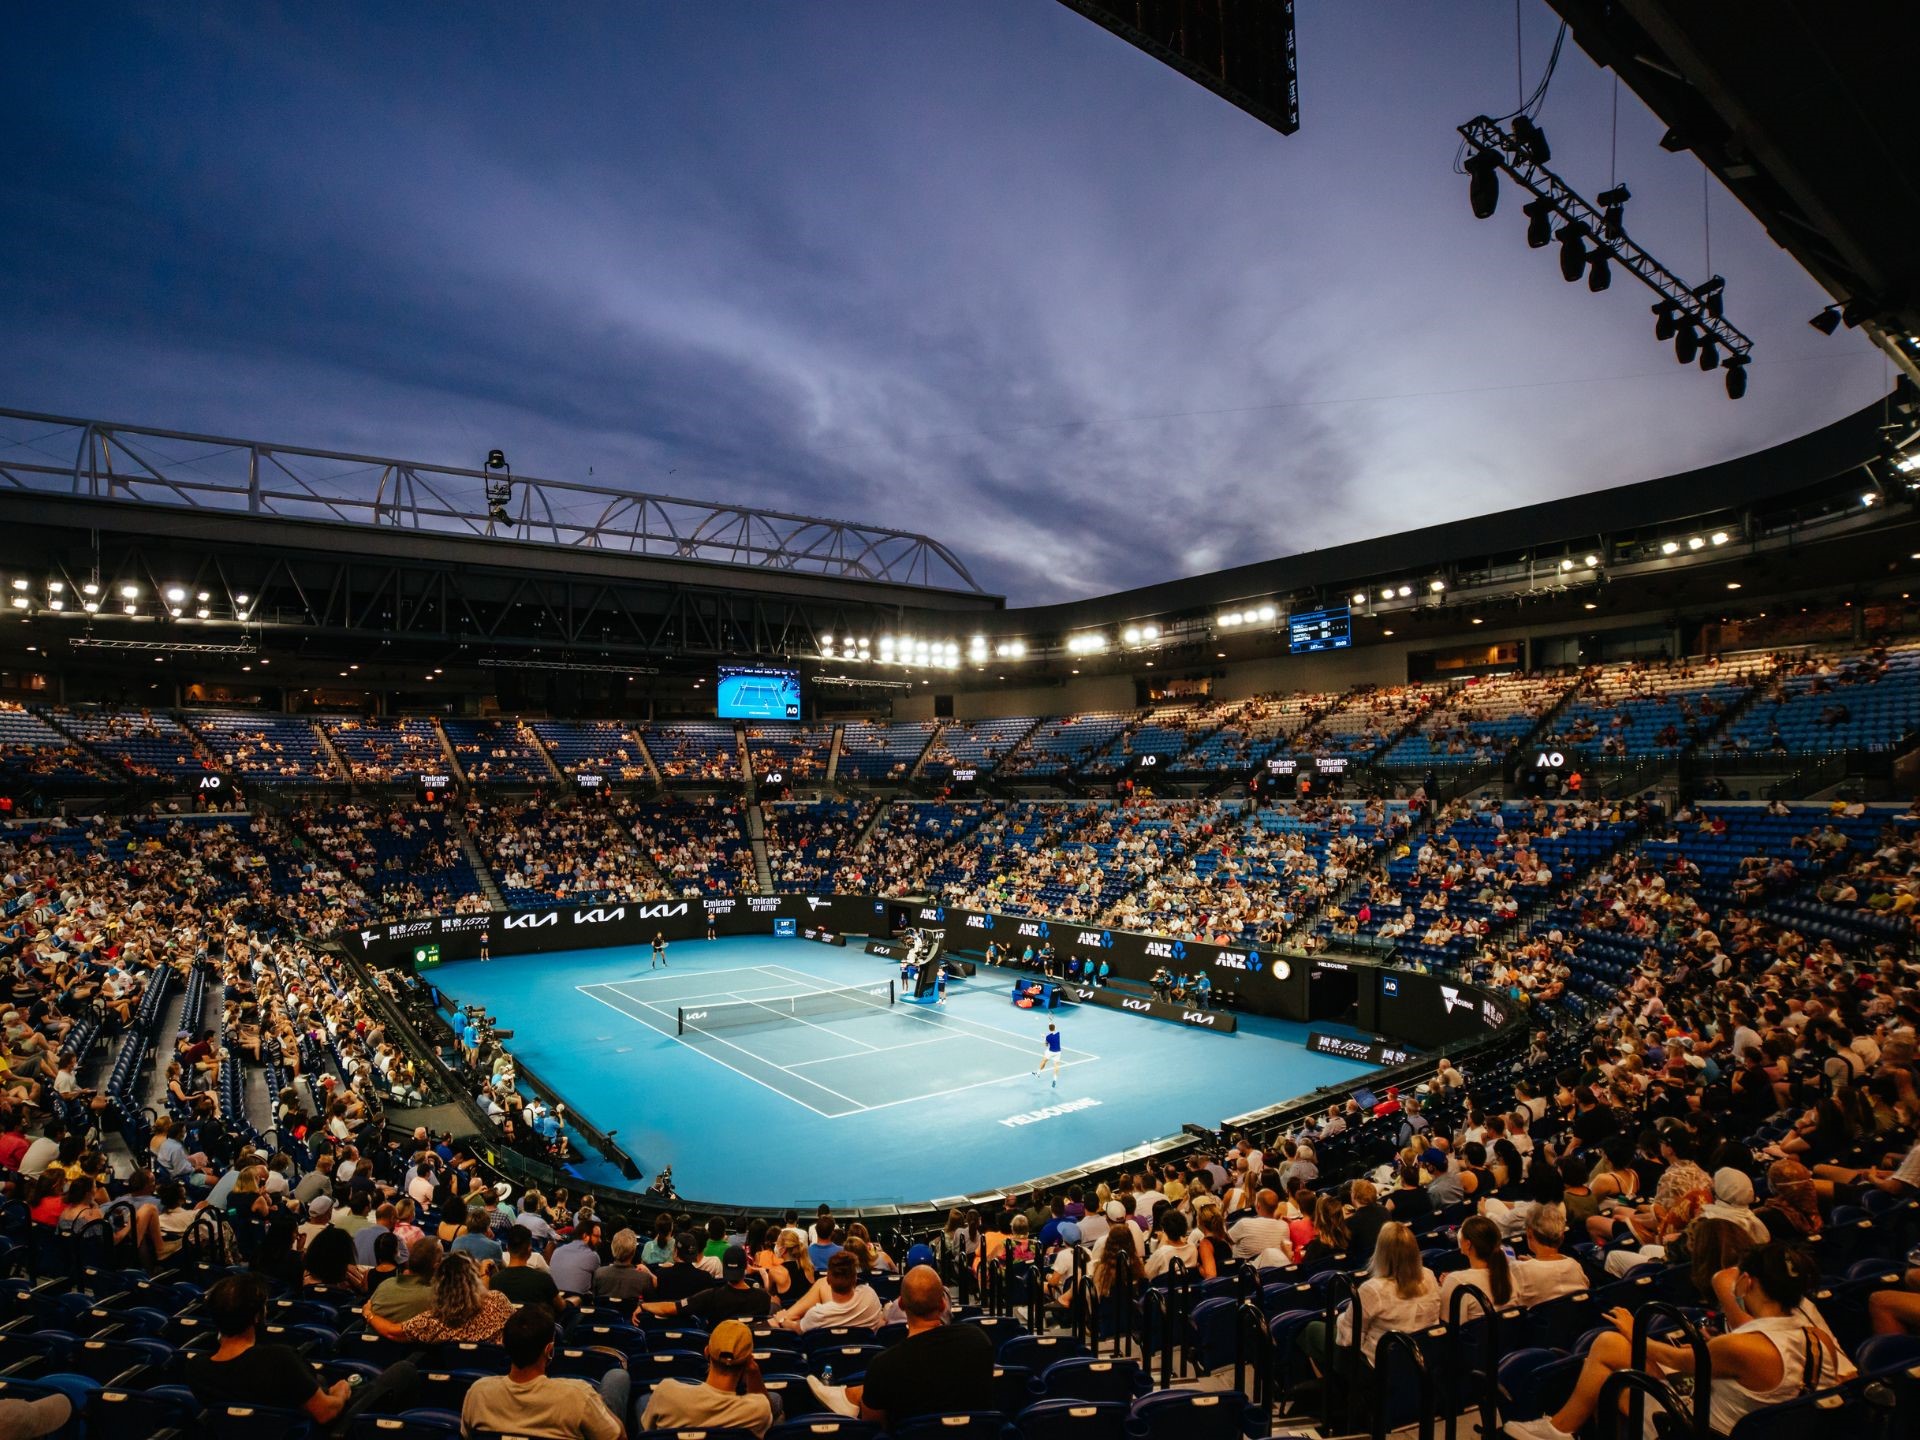 Book your trip to the Australian Open in Melbourne
